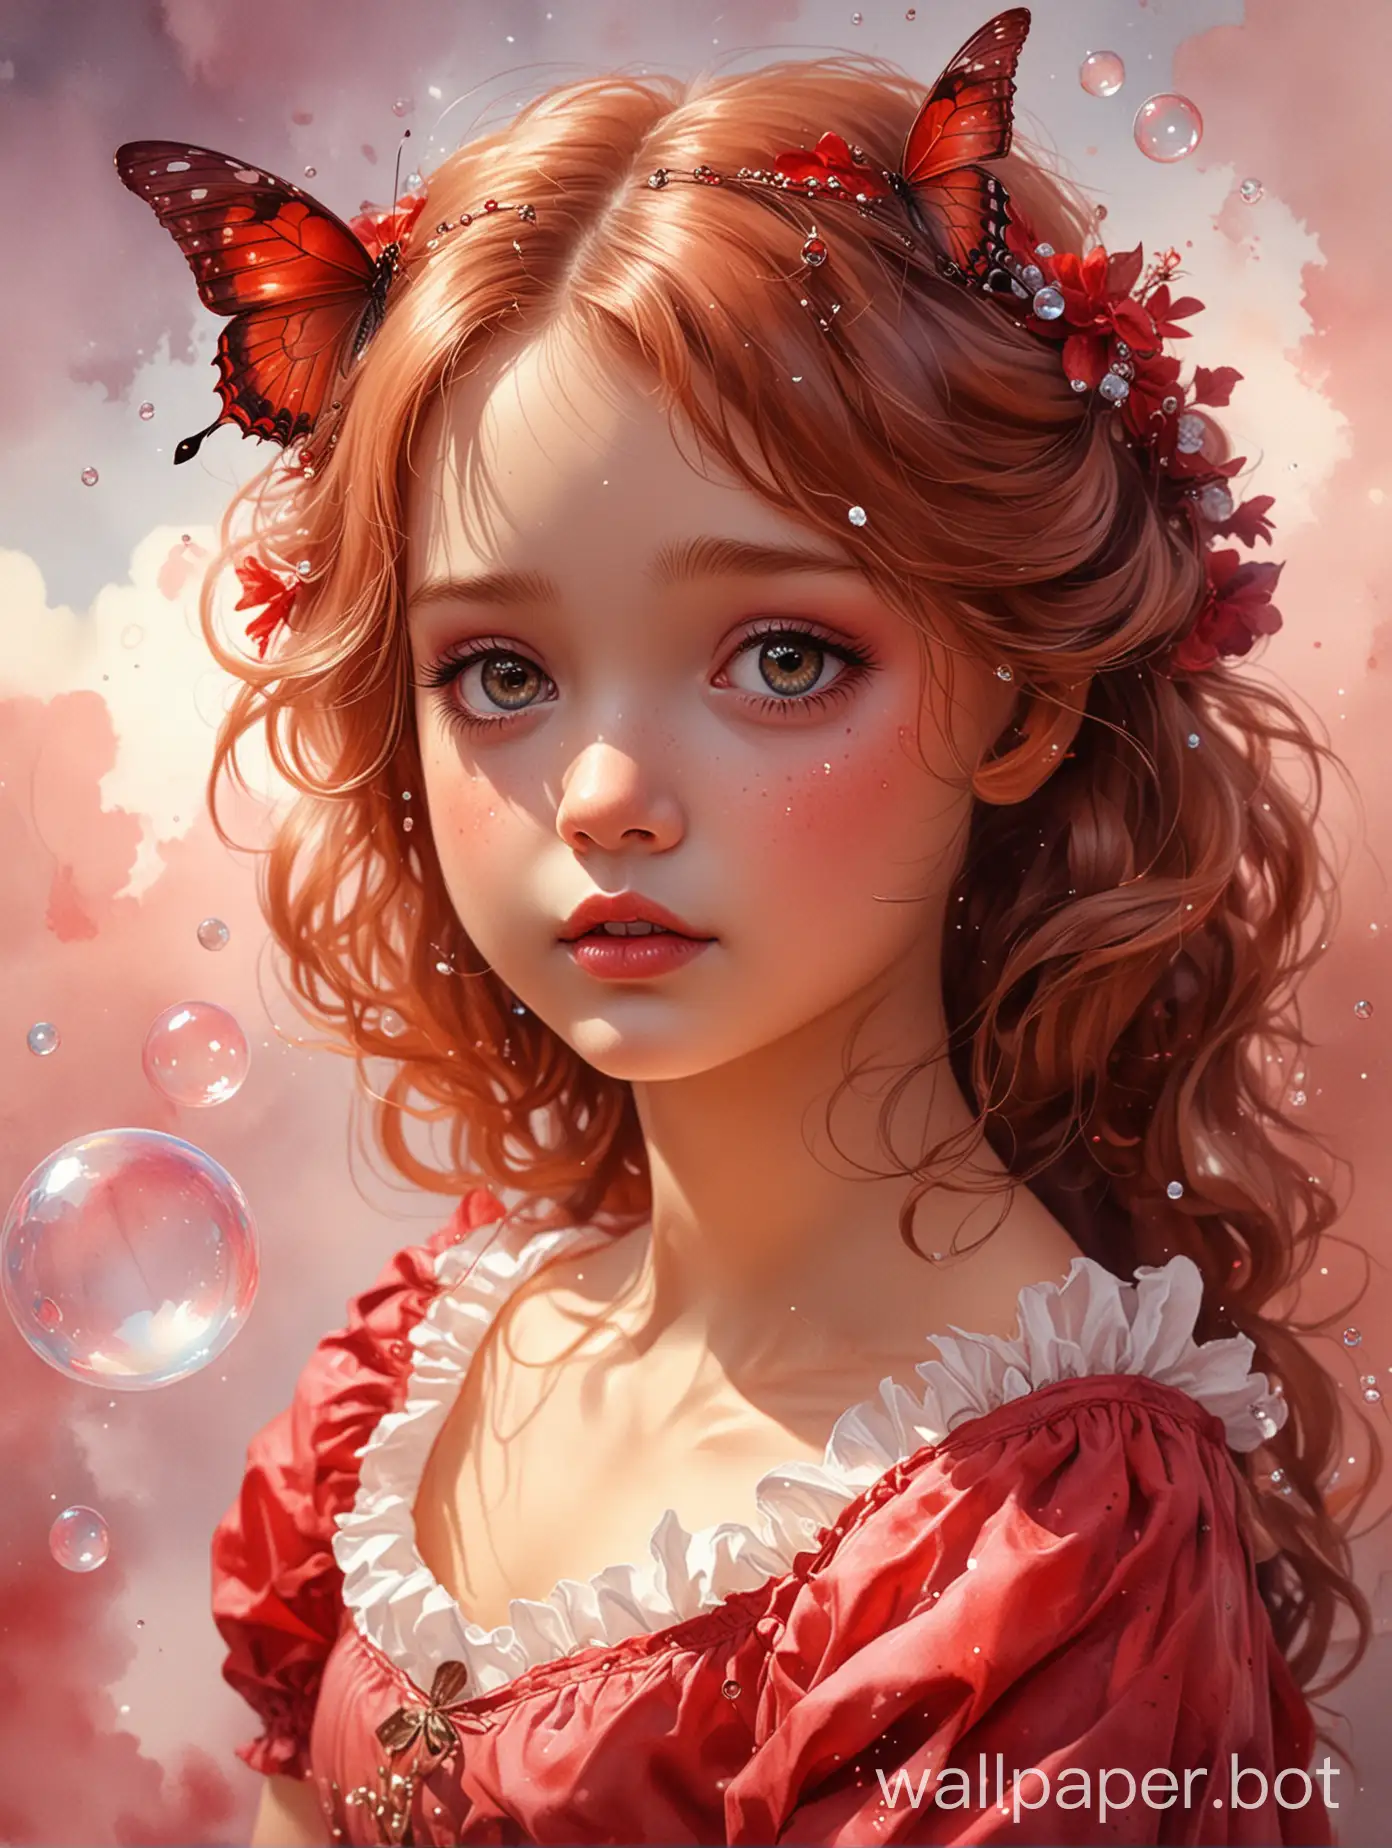 Soap bubbles, cotton clouds, on watercolor shades of crimson, burgundy and other reds| half body|lovely young butterfly princess looking at me with big (light brown highly detailed eyes), shadow play| dynamic pose| fairy tale, a beautiful fantasy loved by children and adults, ultra-high detail, high quality, Artstation, perfect centered composition, watercolor ink.